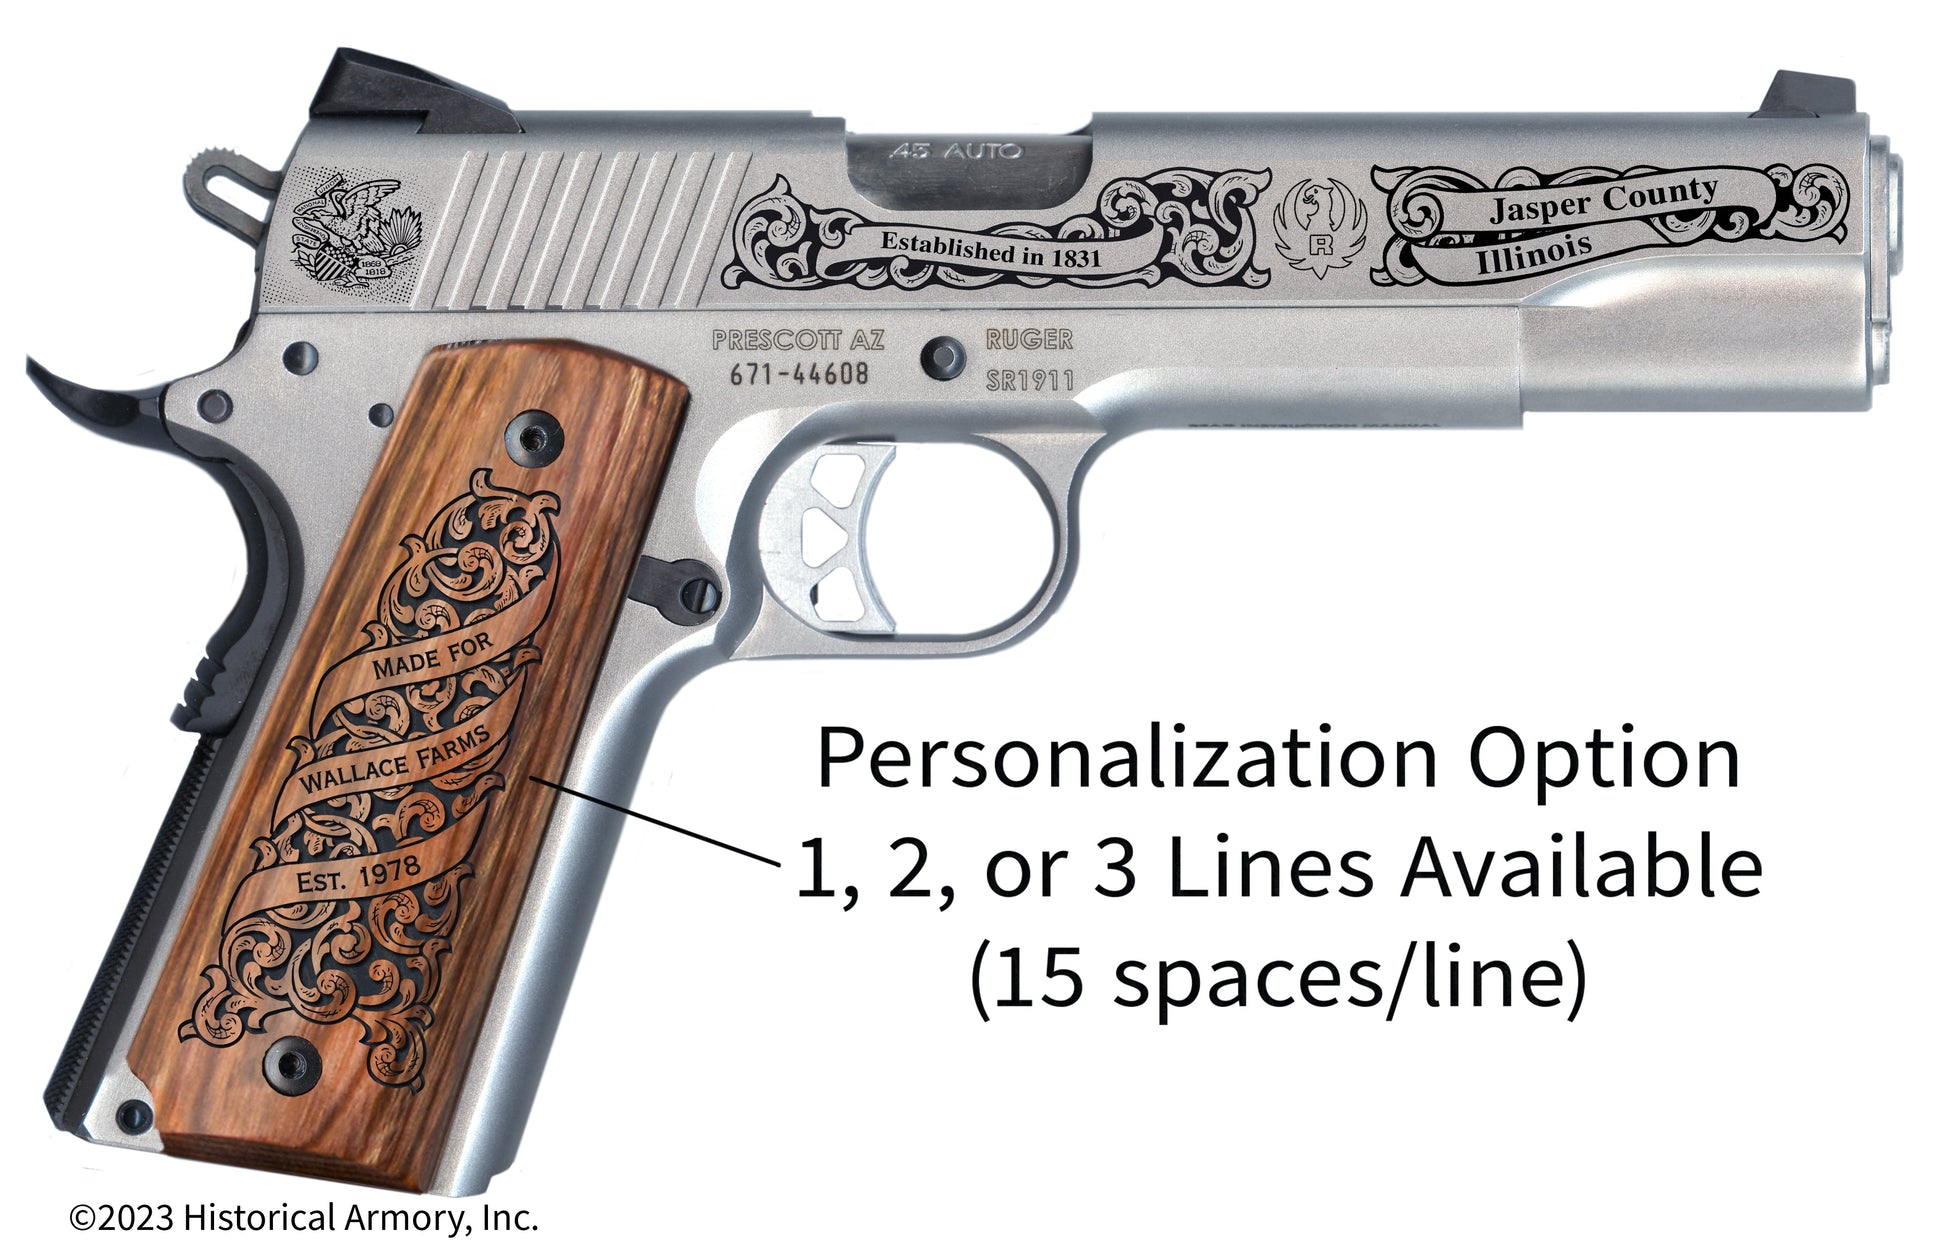 Jasper County Illinois Personalized Engraved .45 Auto Ruger 1911